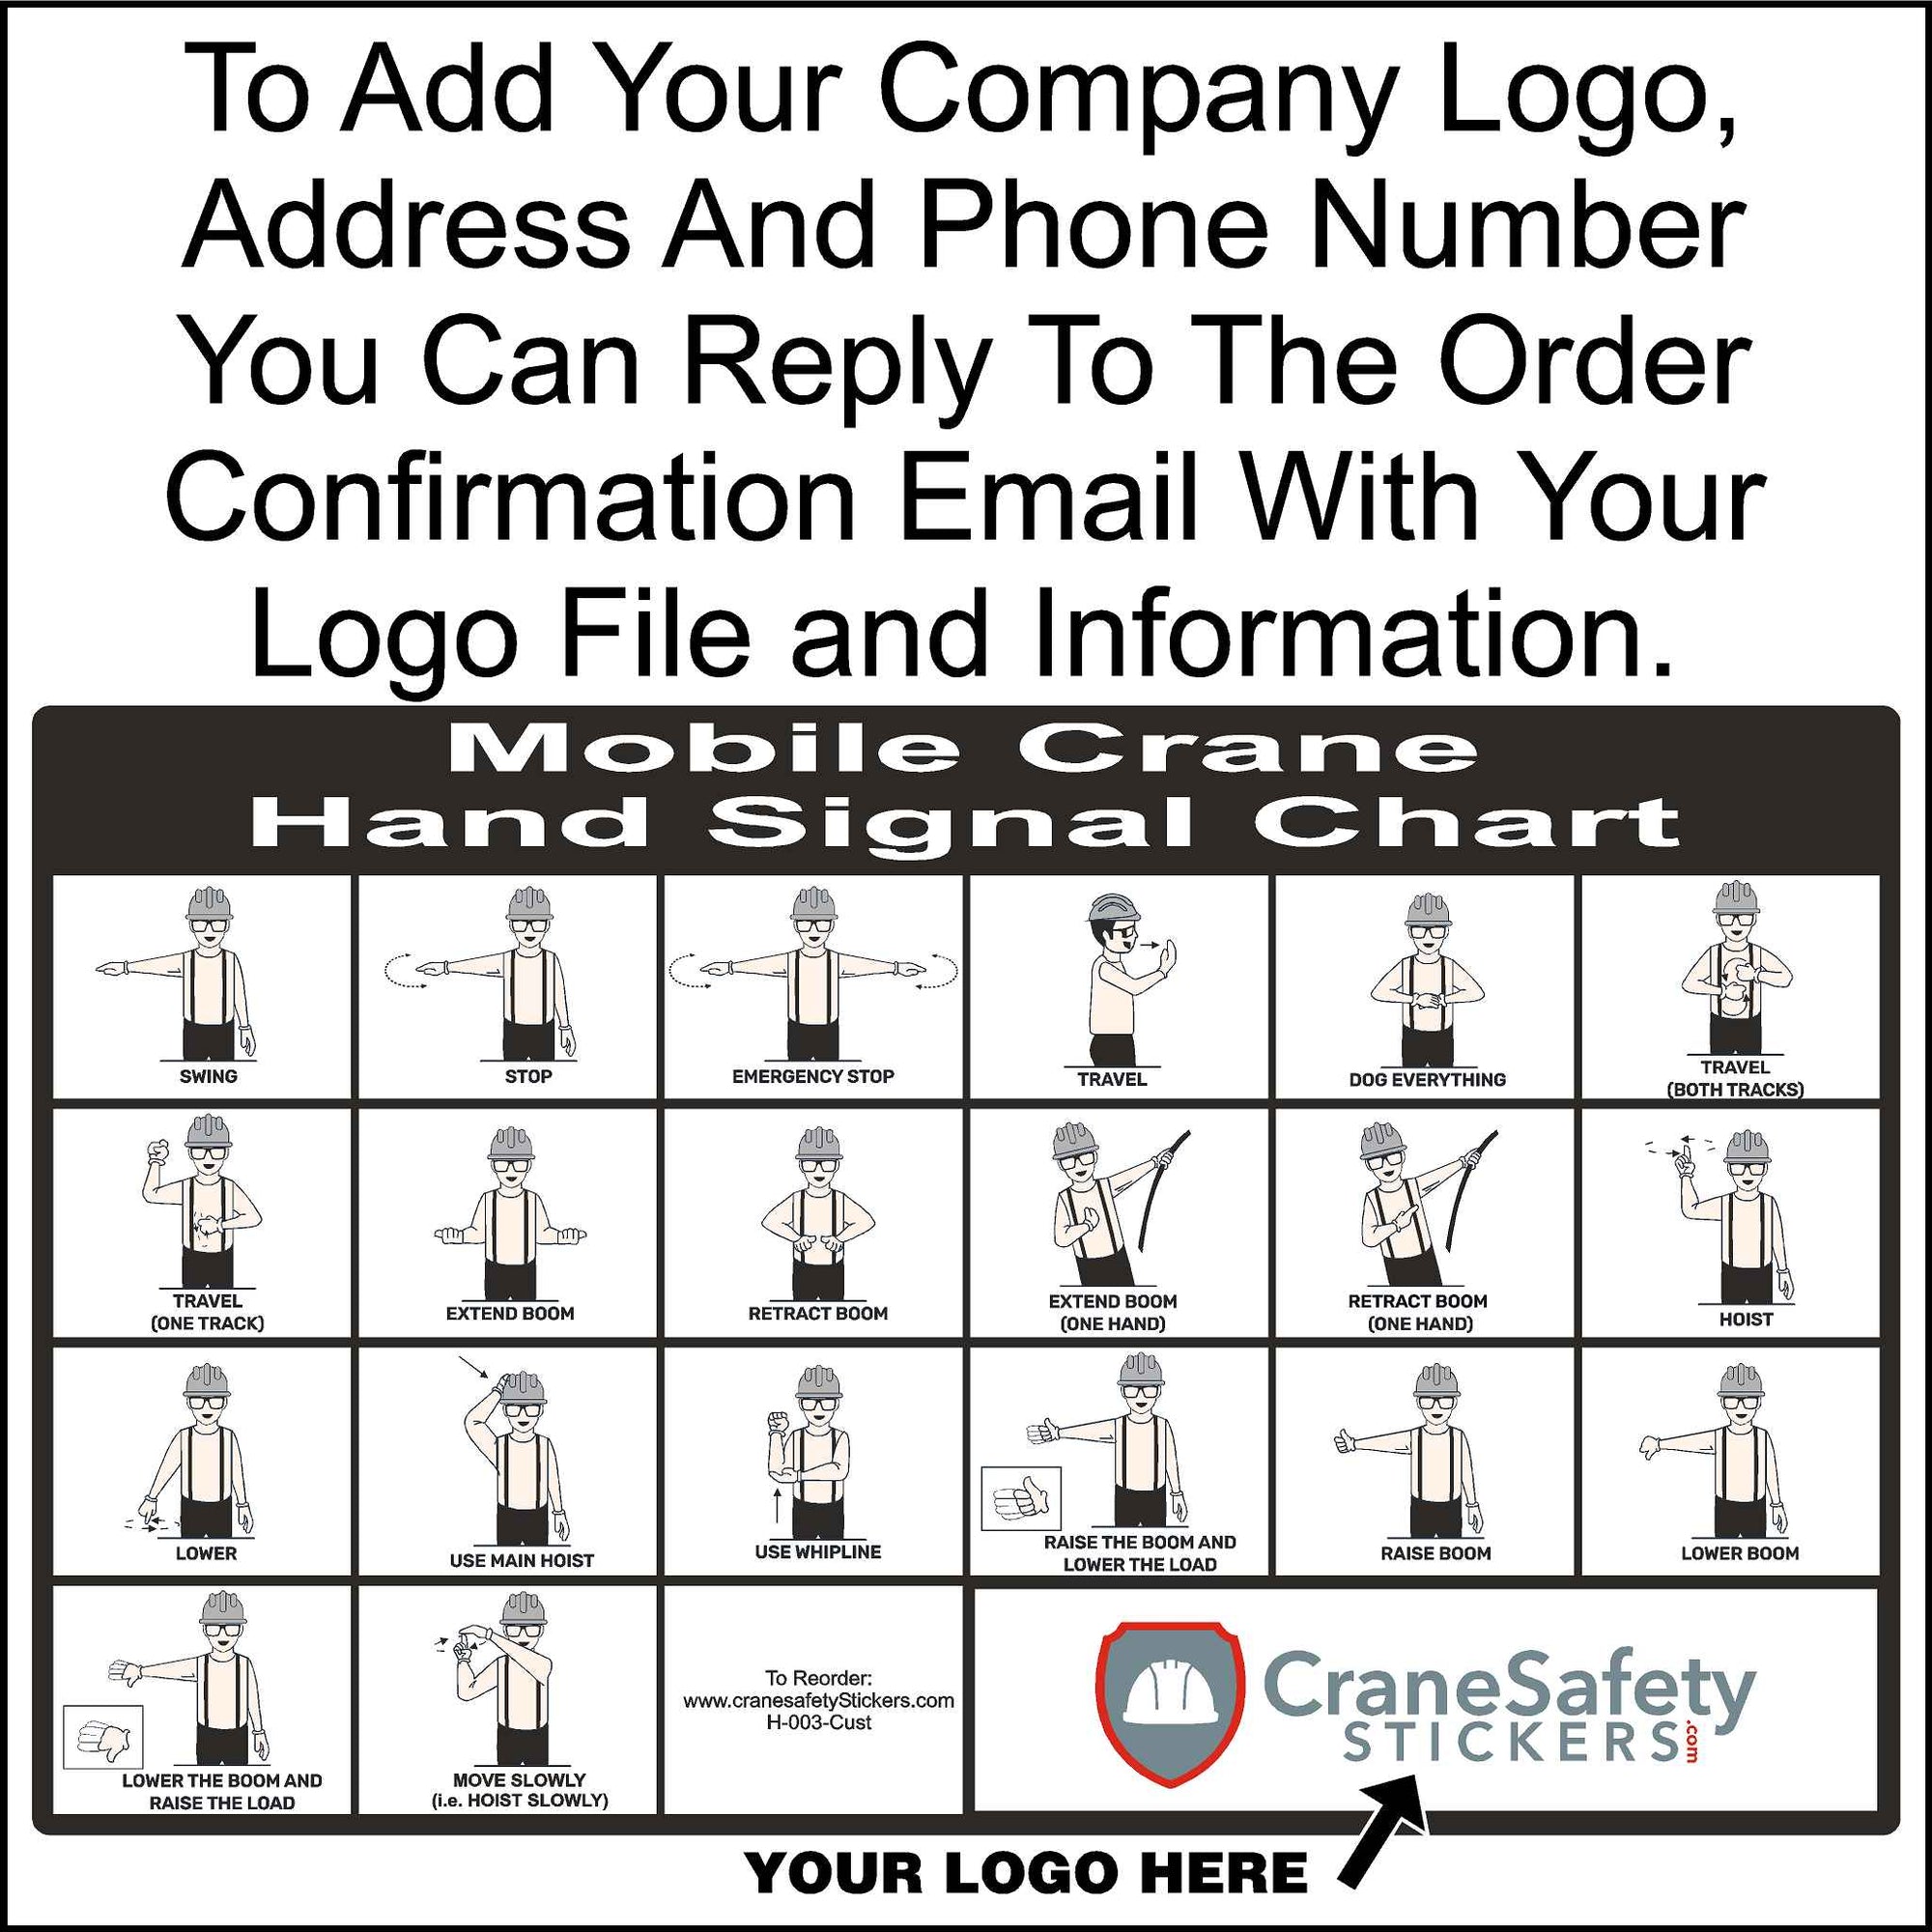 Custom Crane Hand Signal Chart We Print This With Your Company Logo. 8.25 Inches tall by 14 Inches Wide in Size.